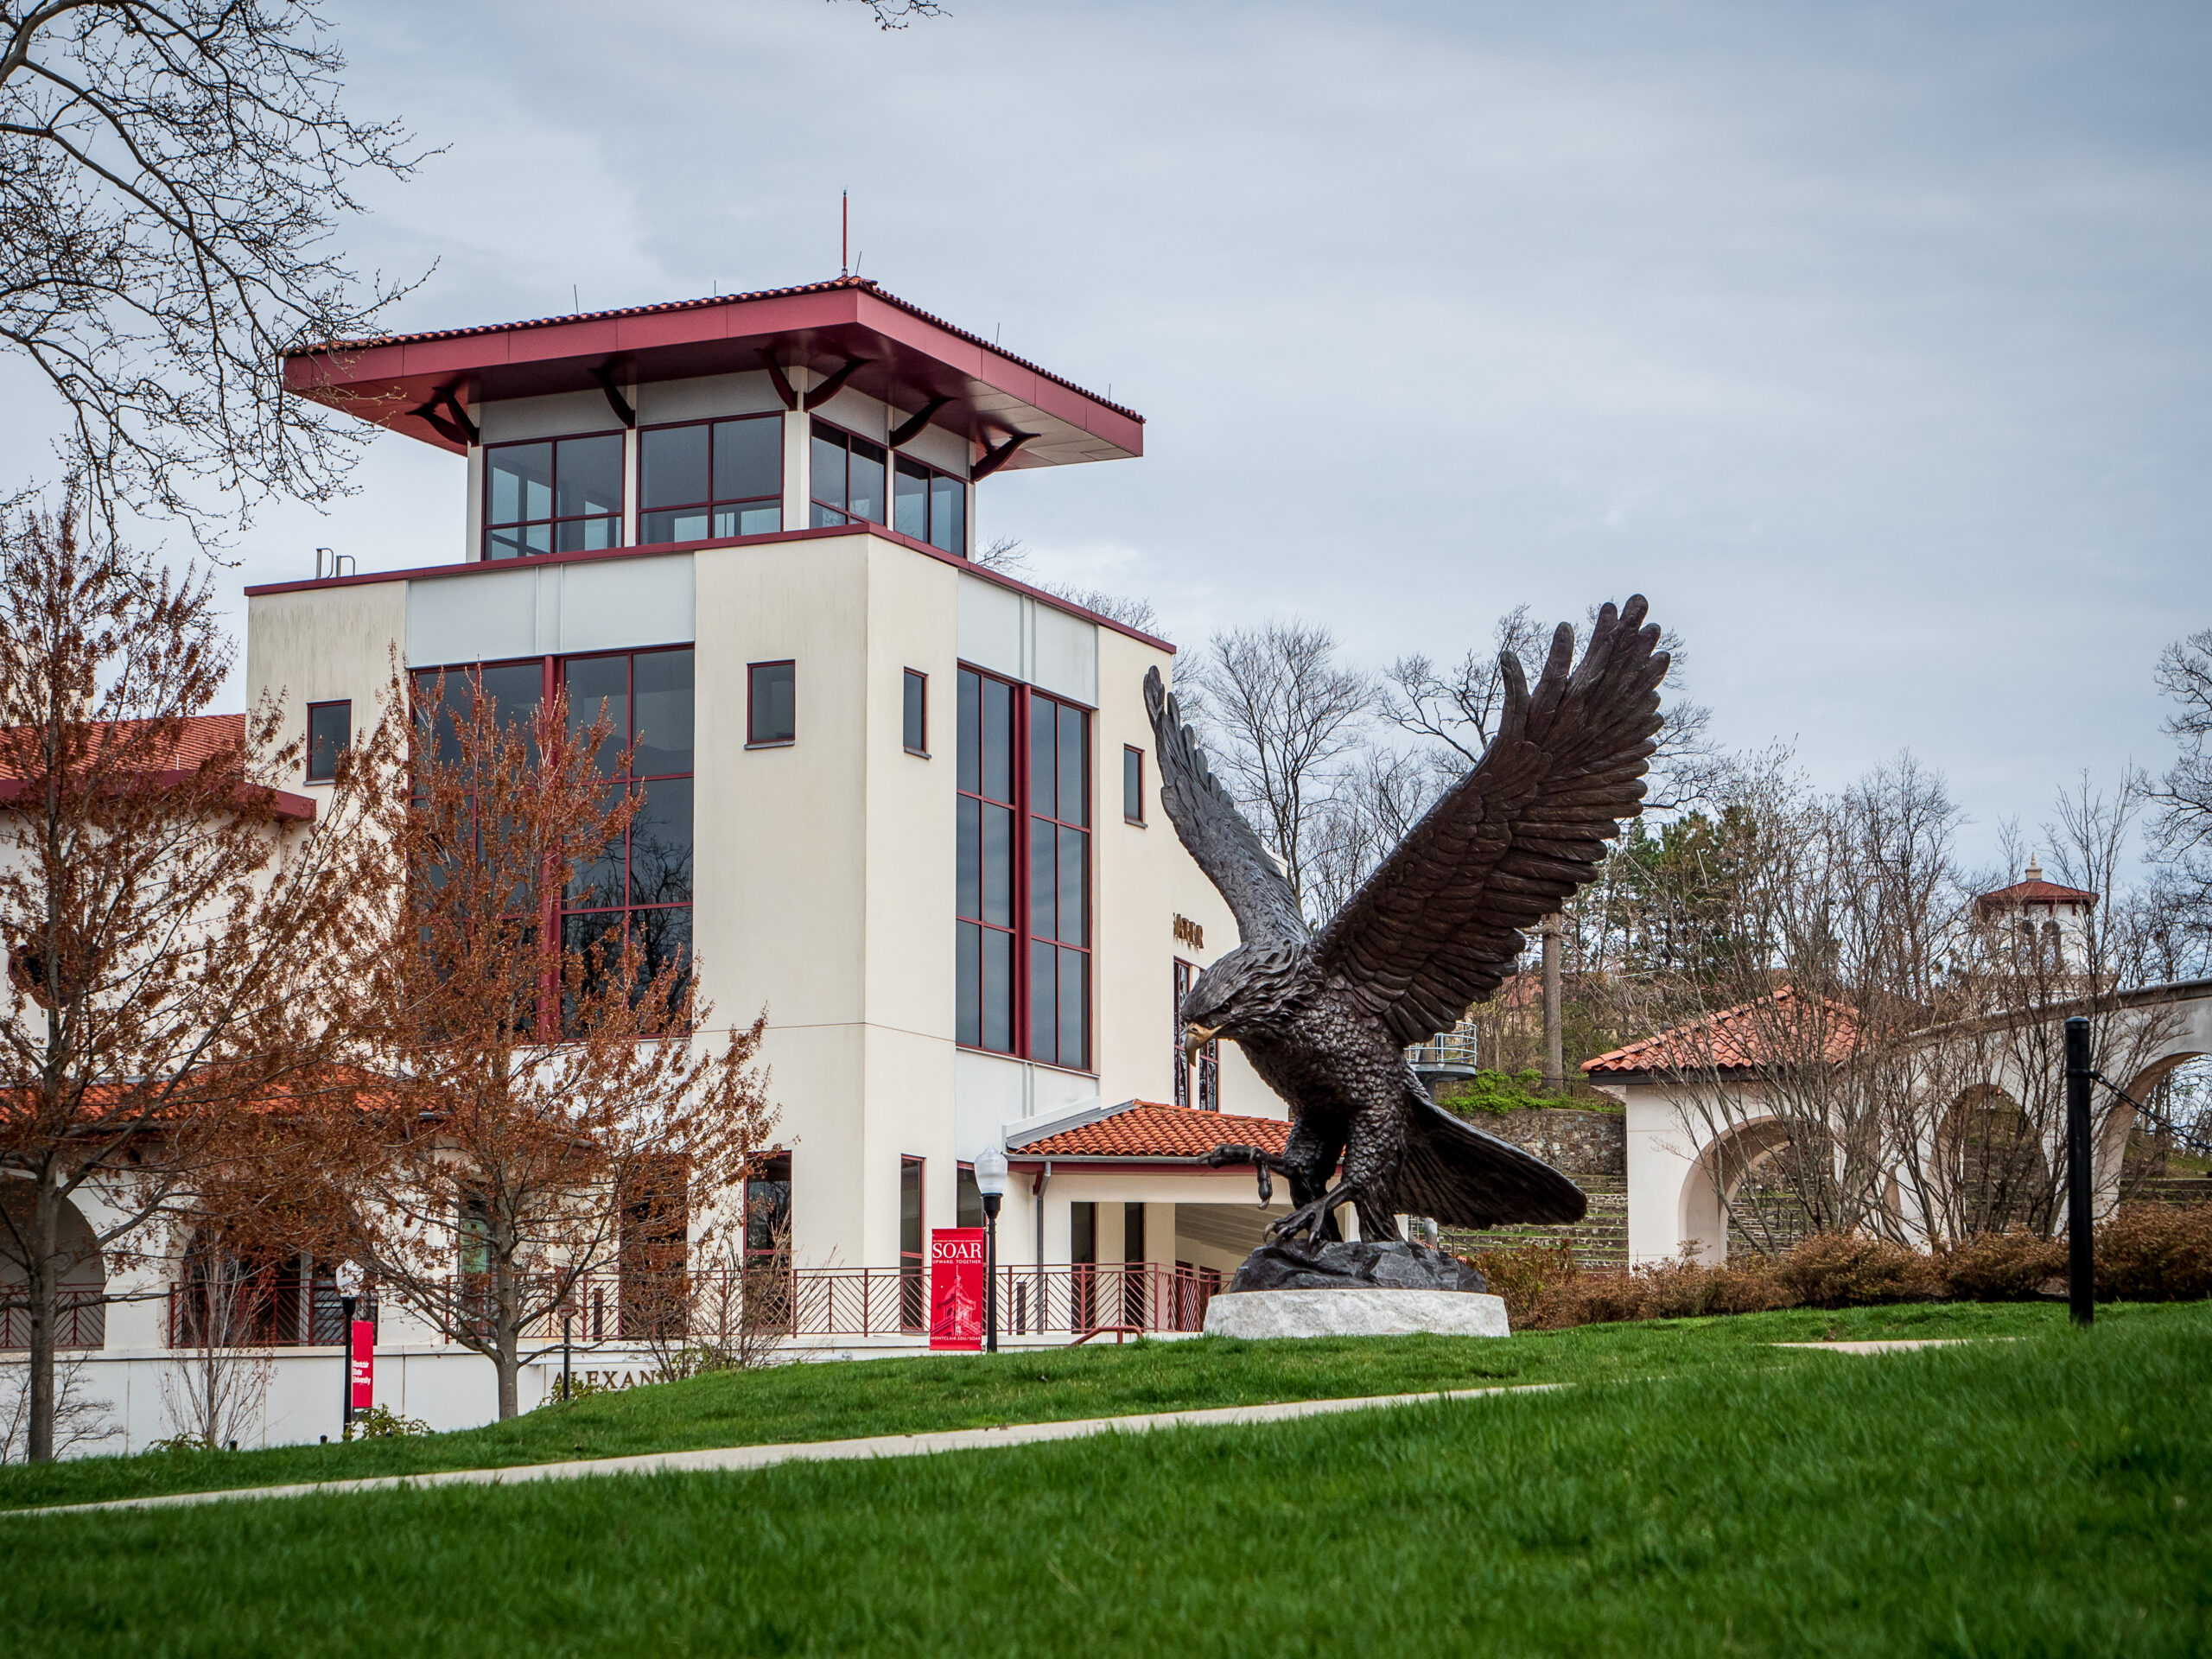 Leaders at Montclair University in New Jersey are now figuring out how to open residence halls, dining halls, the library and other facilities in fall 2020.